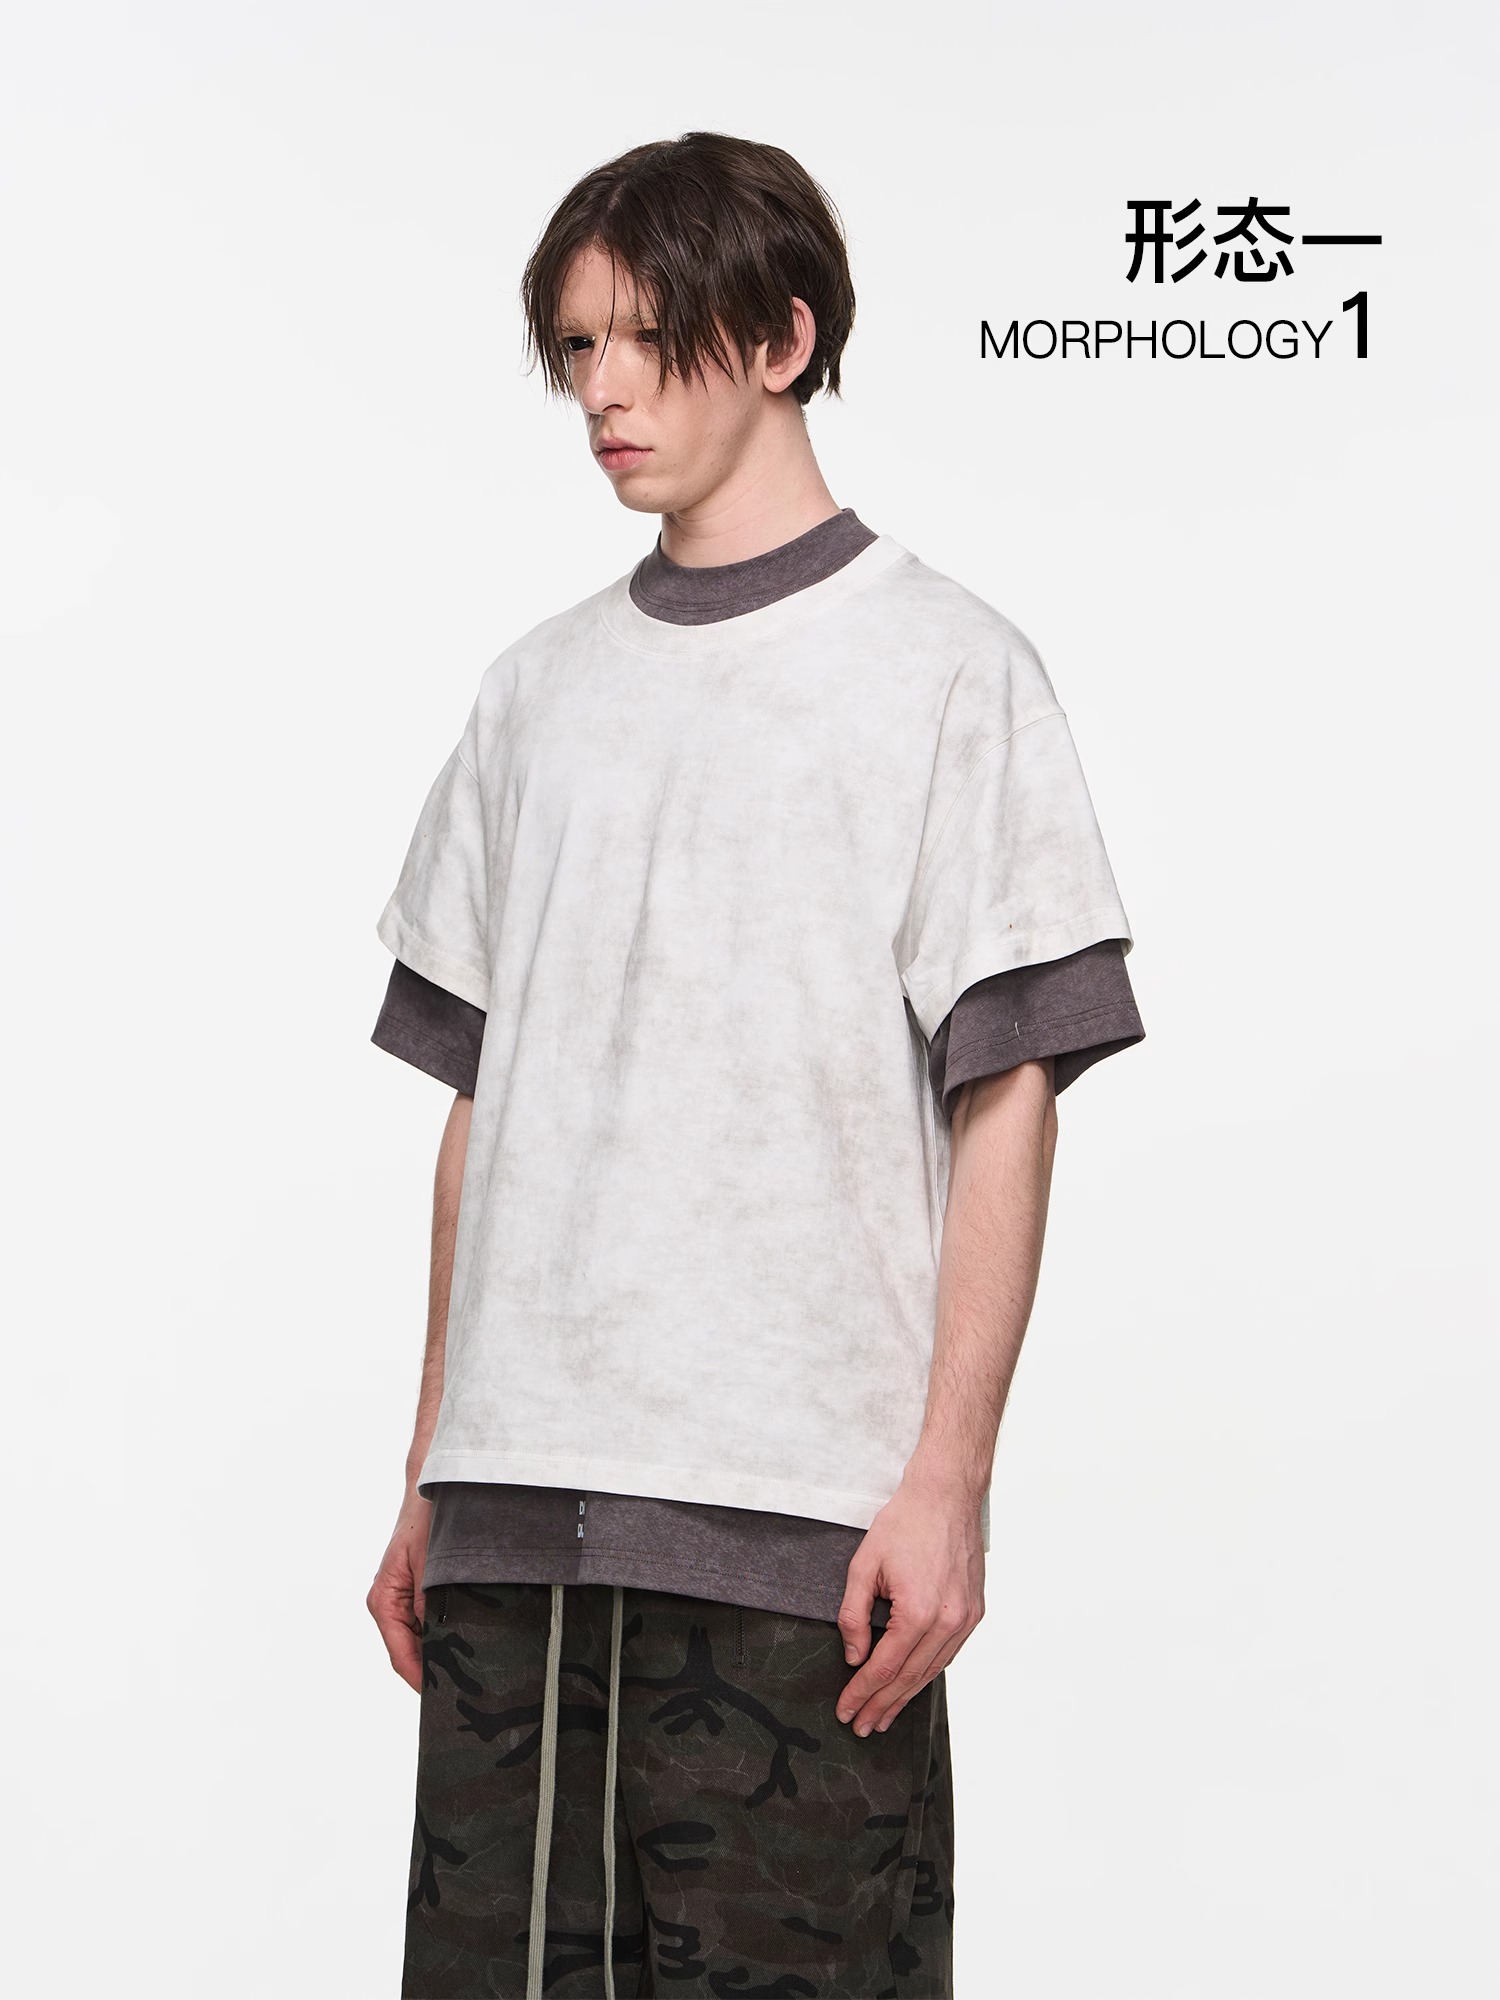 BLINDNOPLAN 24SS Worn-out Wanderer Double-layer Multi-wearing T-shirt